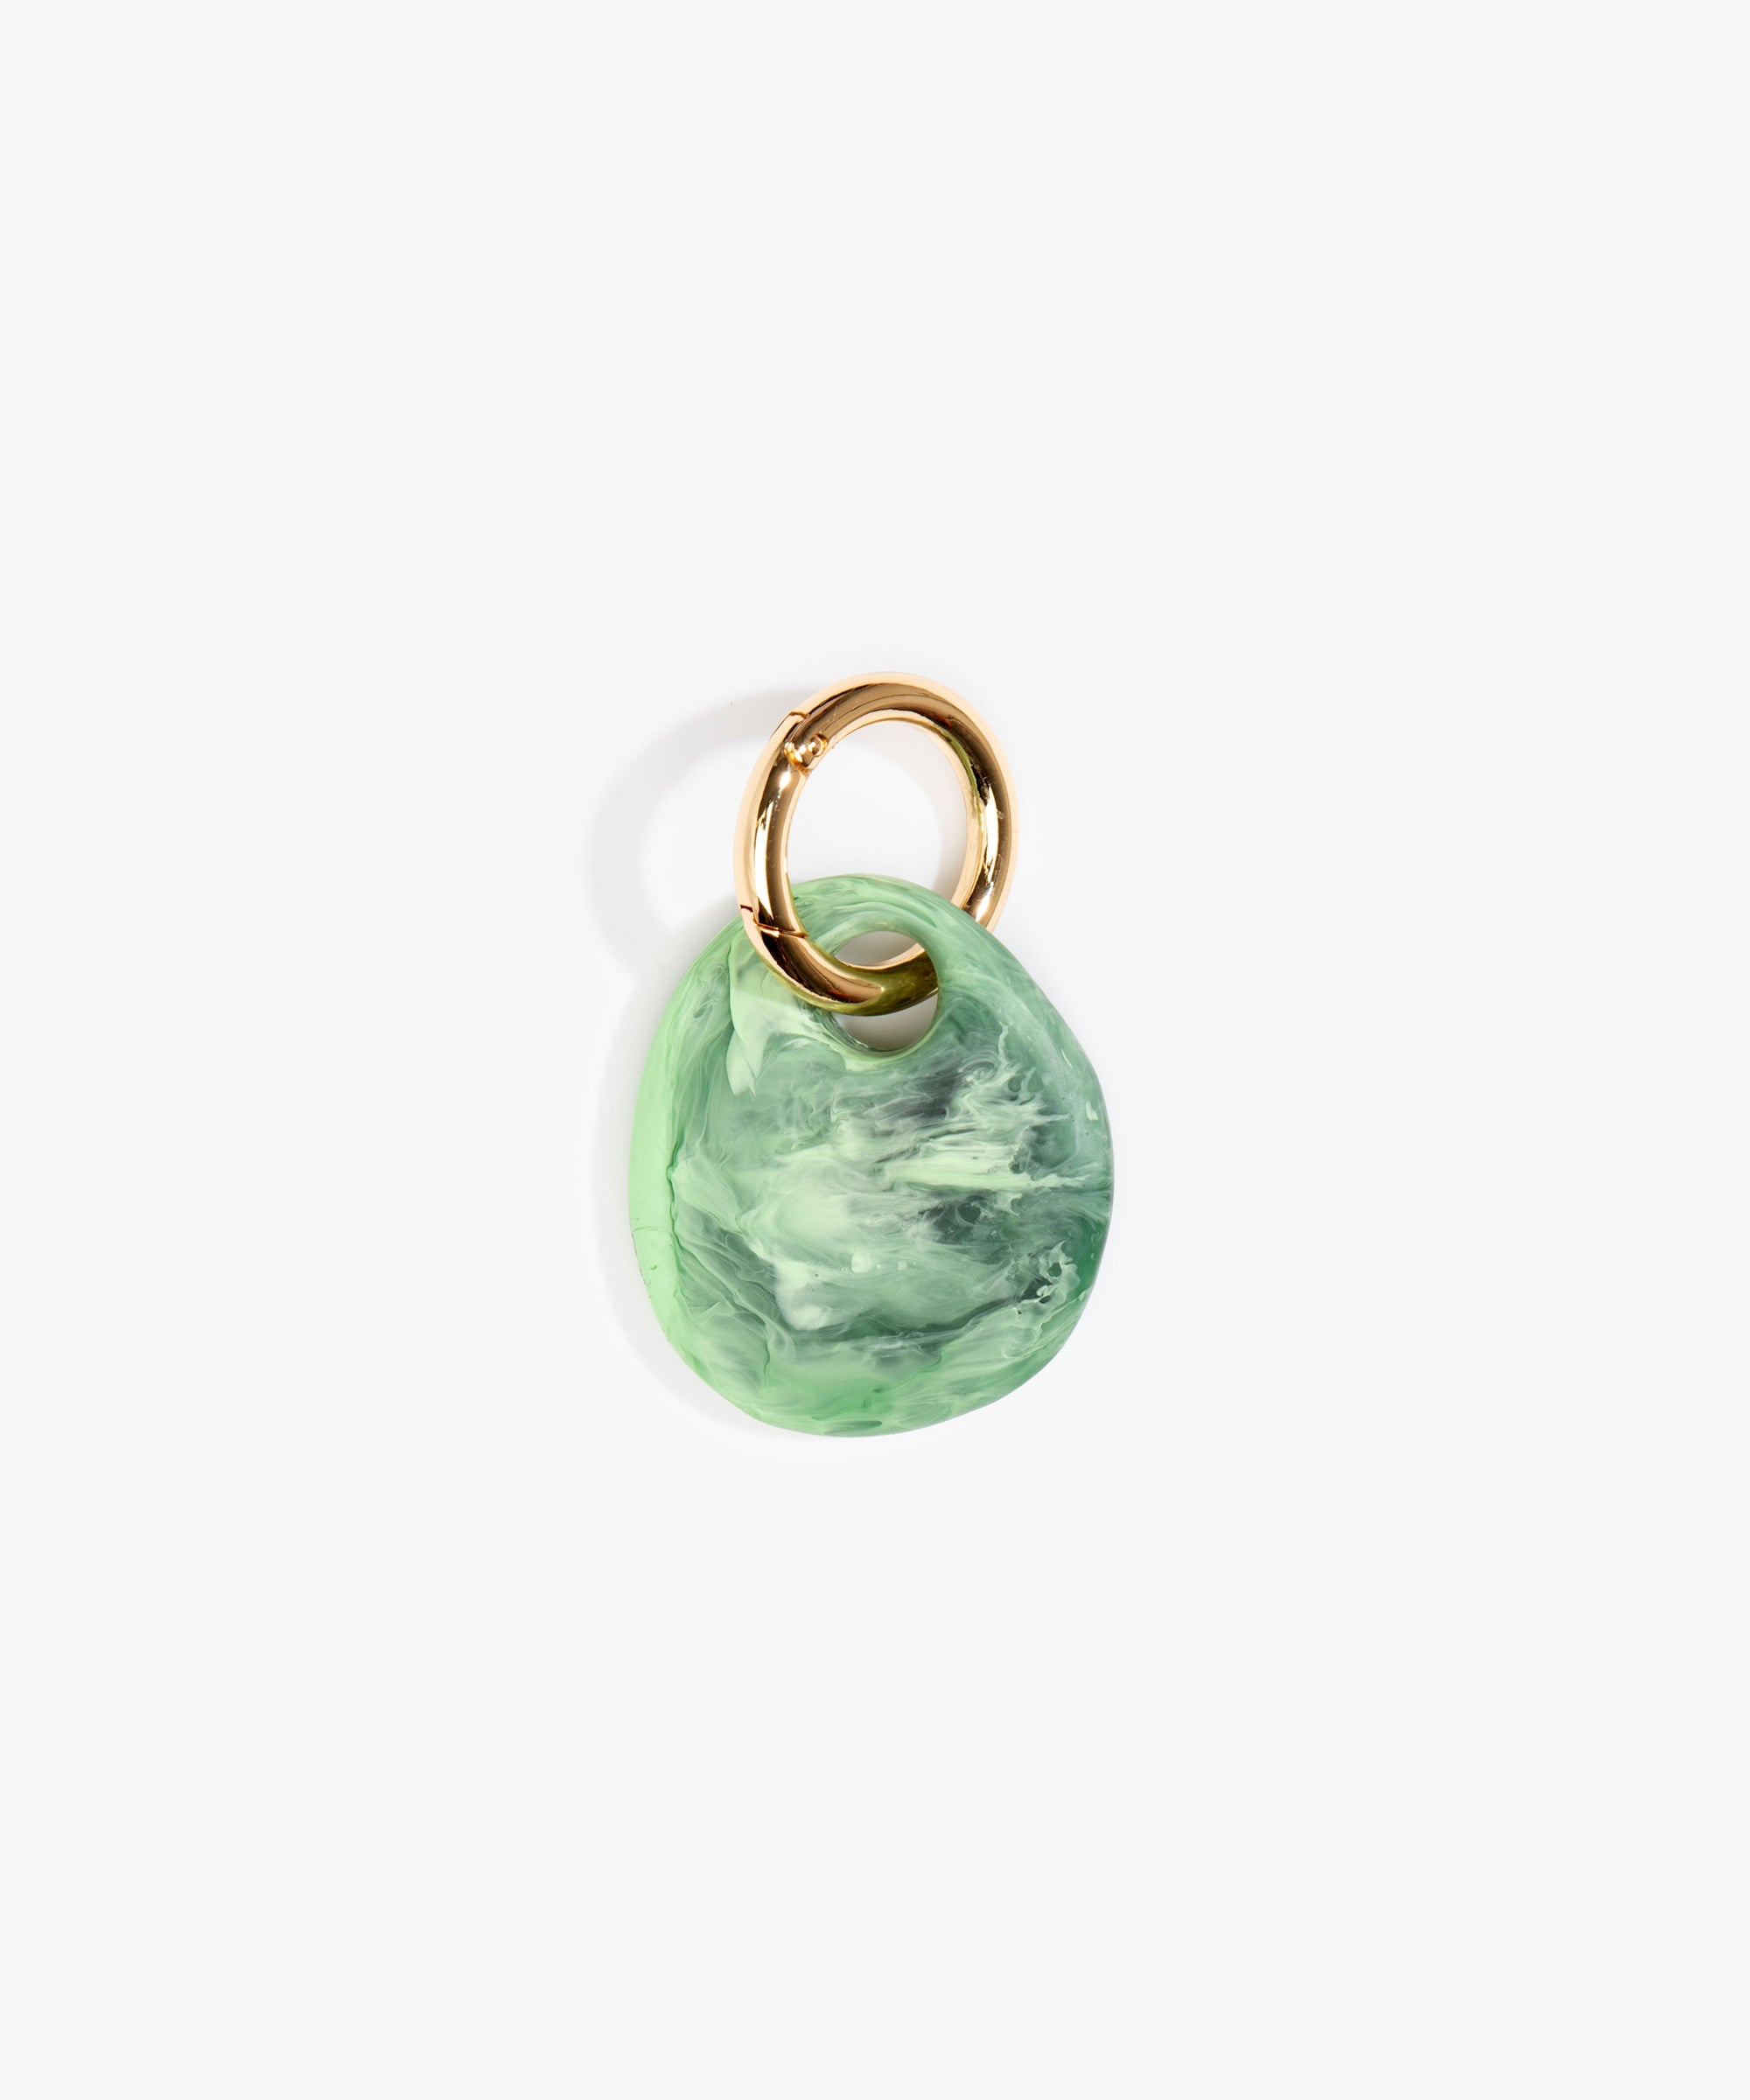 Dinosaur Designs Earth Keyring Keychains in Moss color resin with Brass Metal